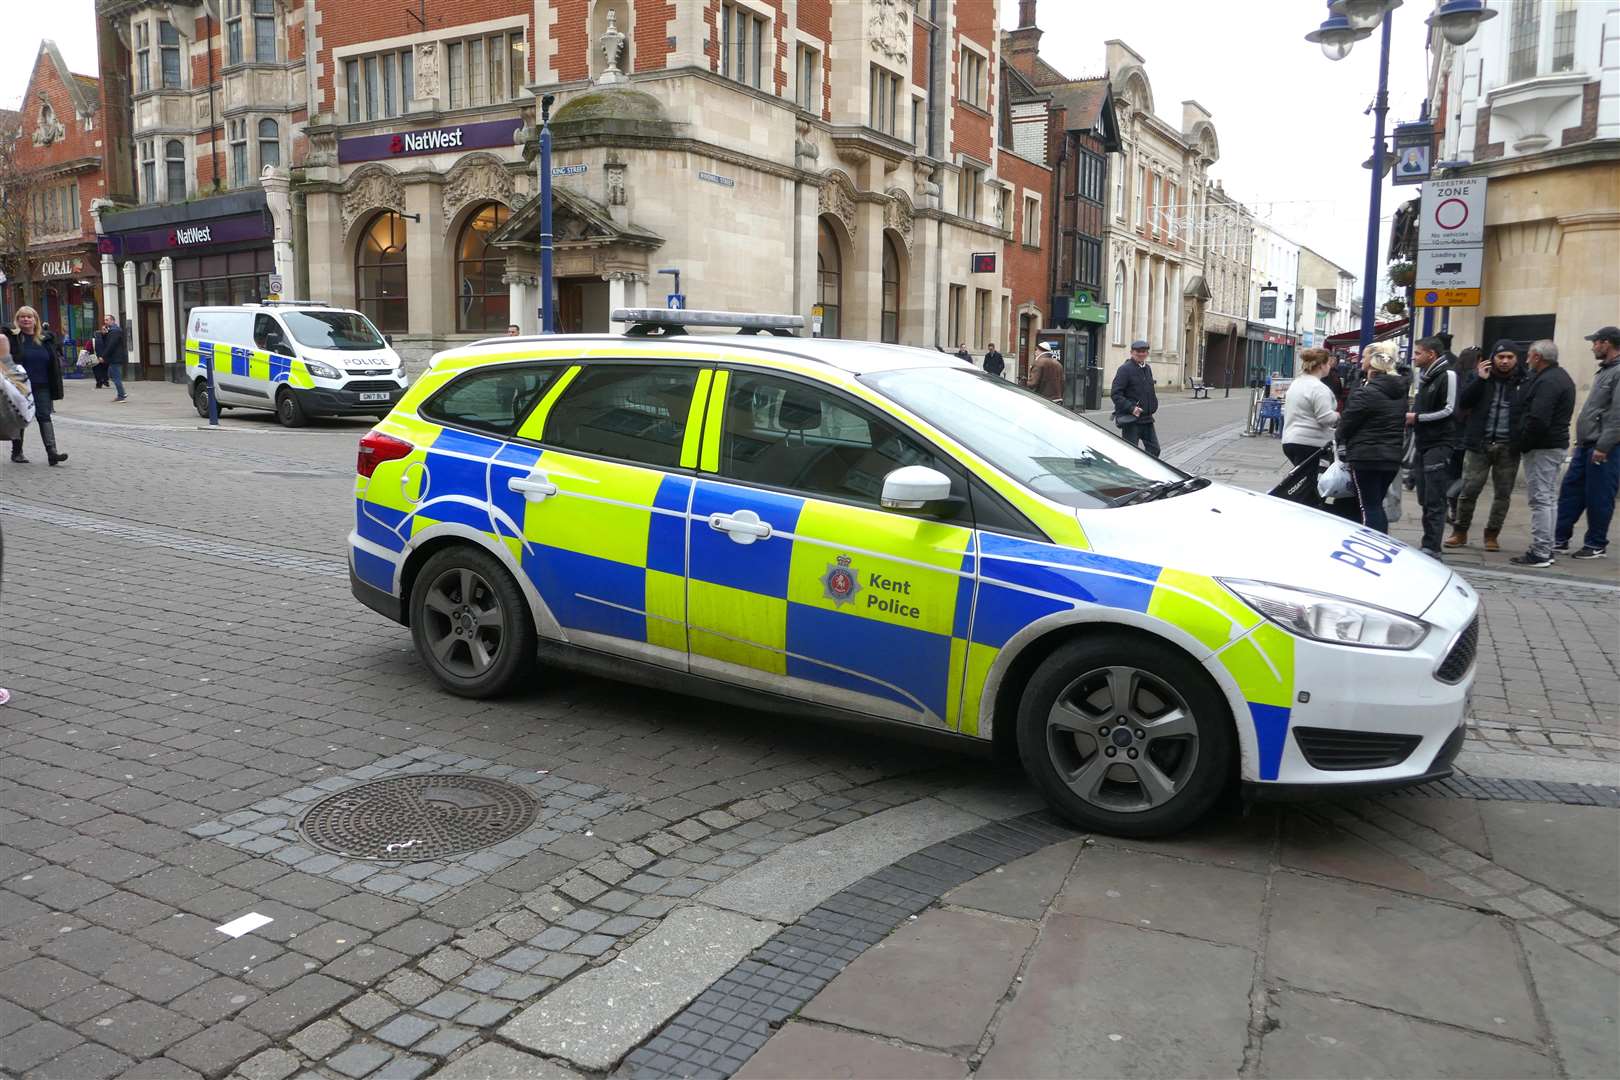 Police were spotted in Gravesend town centre